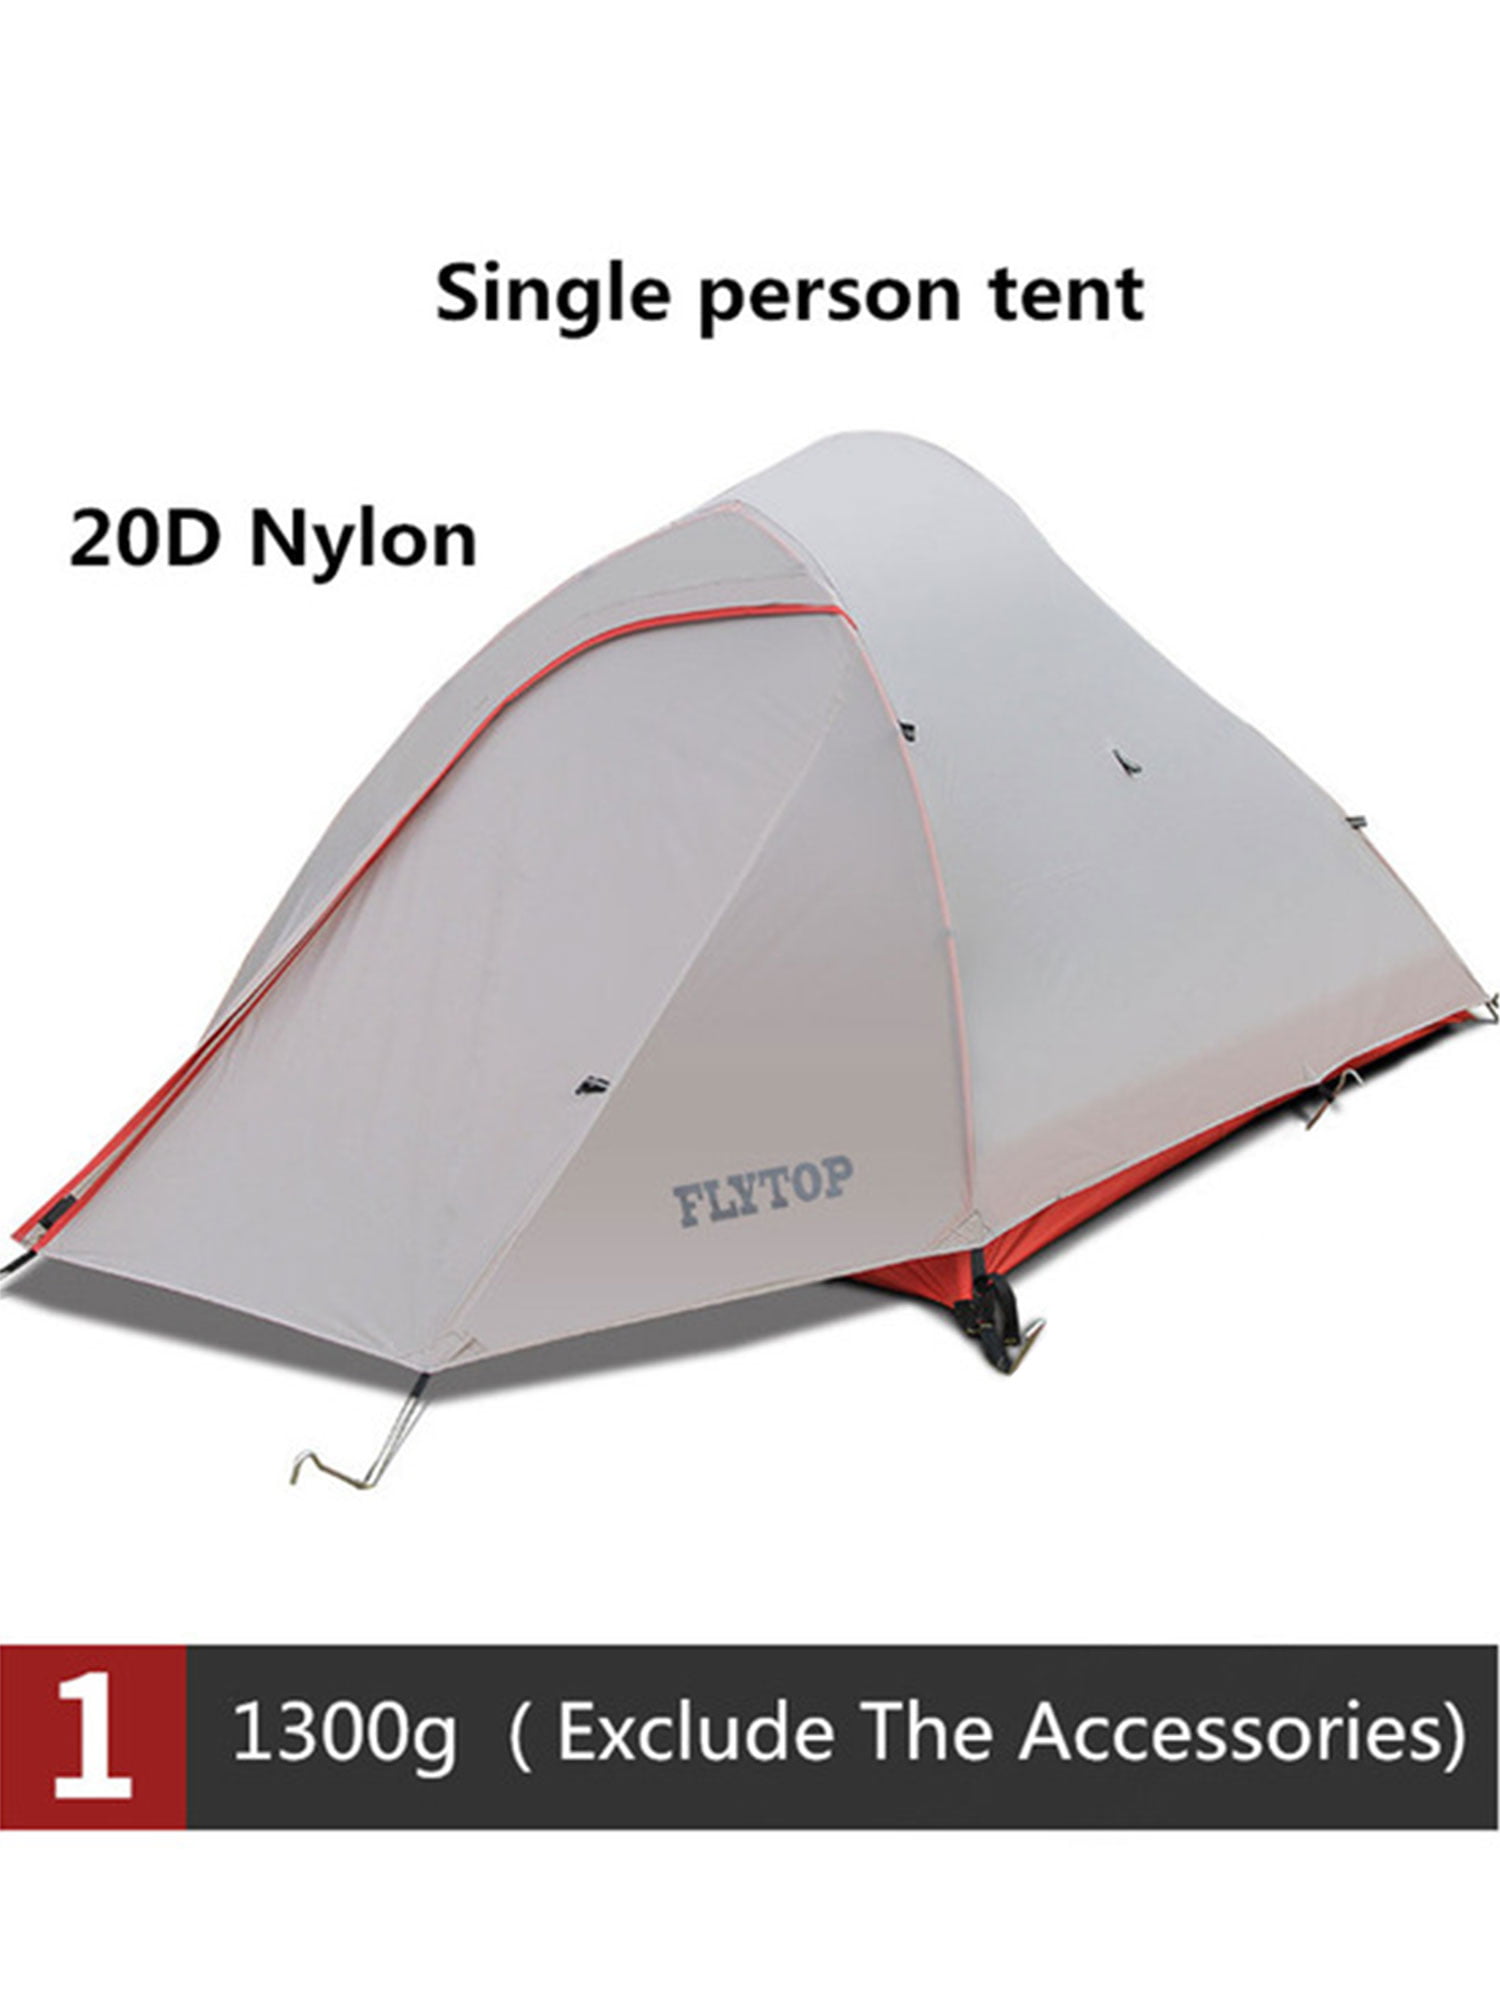 Cloud Up 1 Person Tent Double-layer Outdoor Camping Tent Ultralight Portable 4 Seasons Tent Waterproof Camp Tent for Backpacking Traveling Hiking